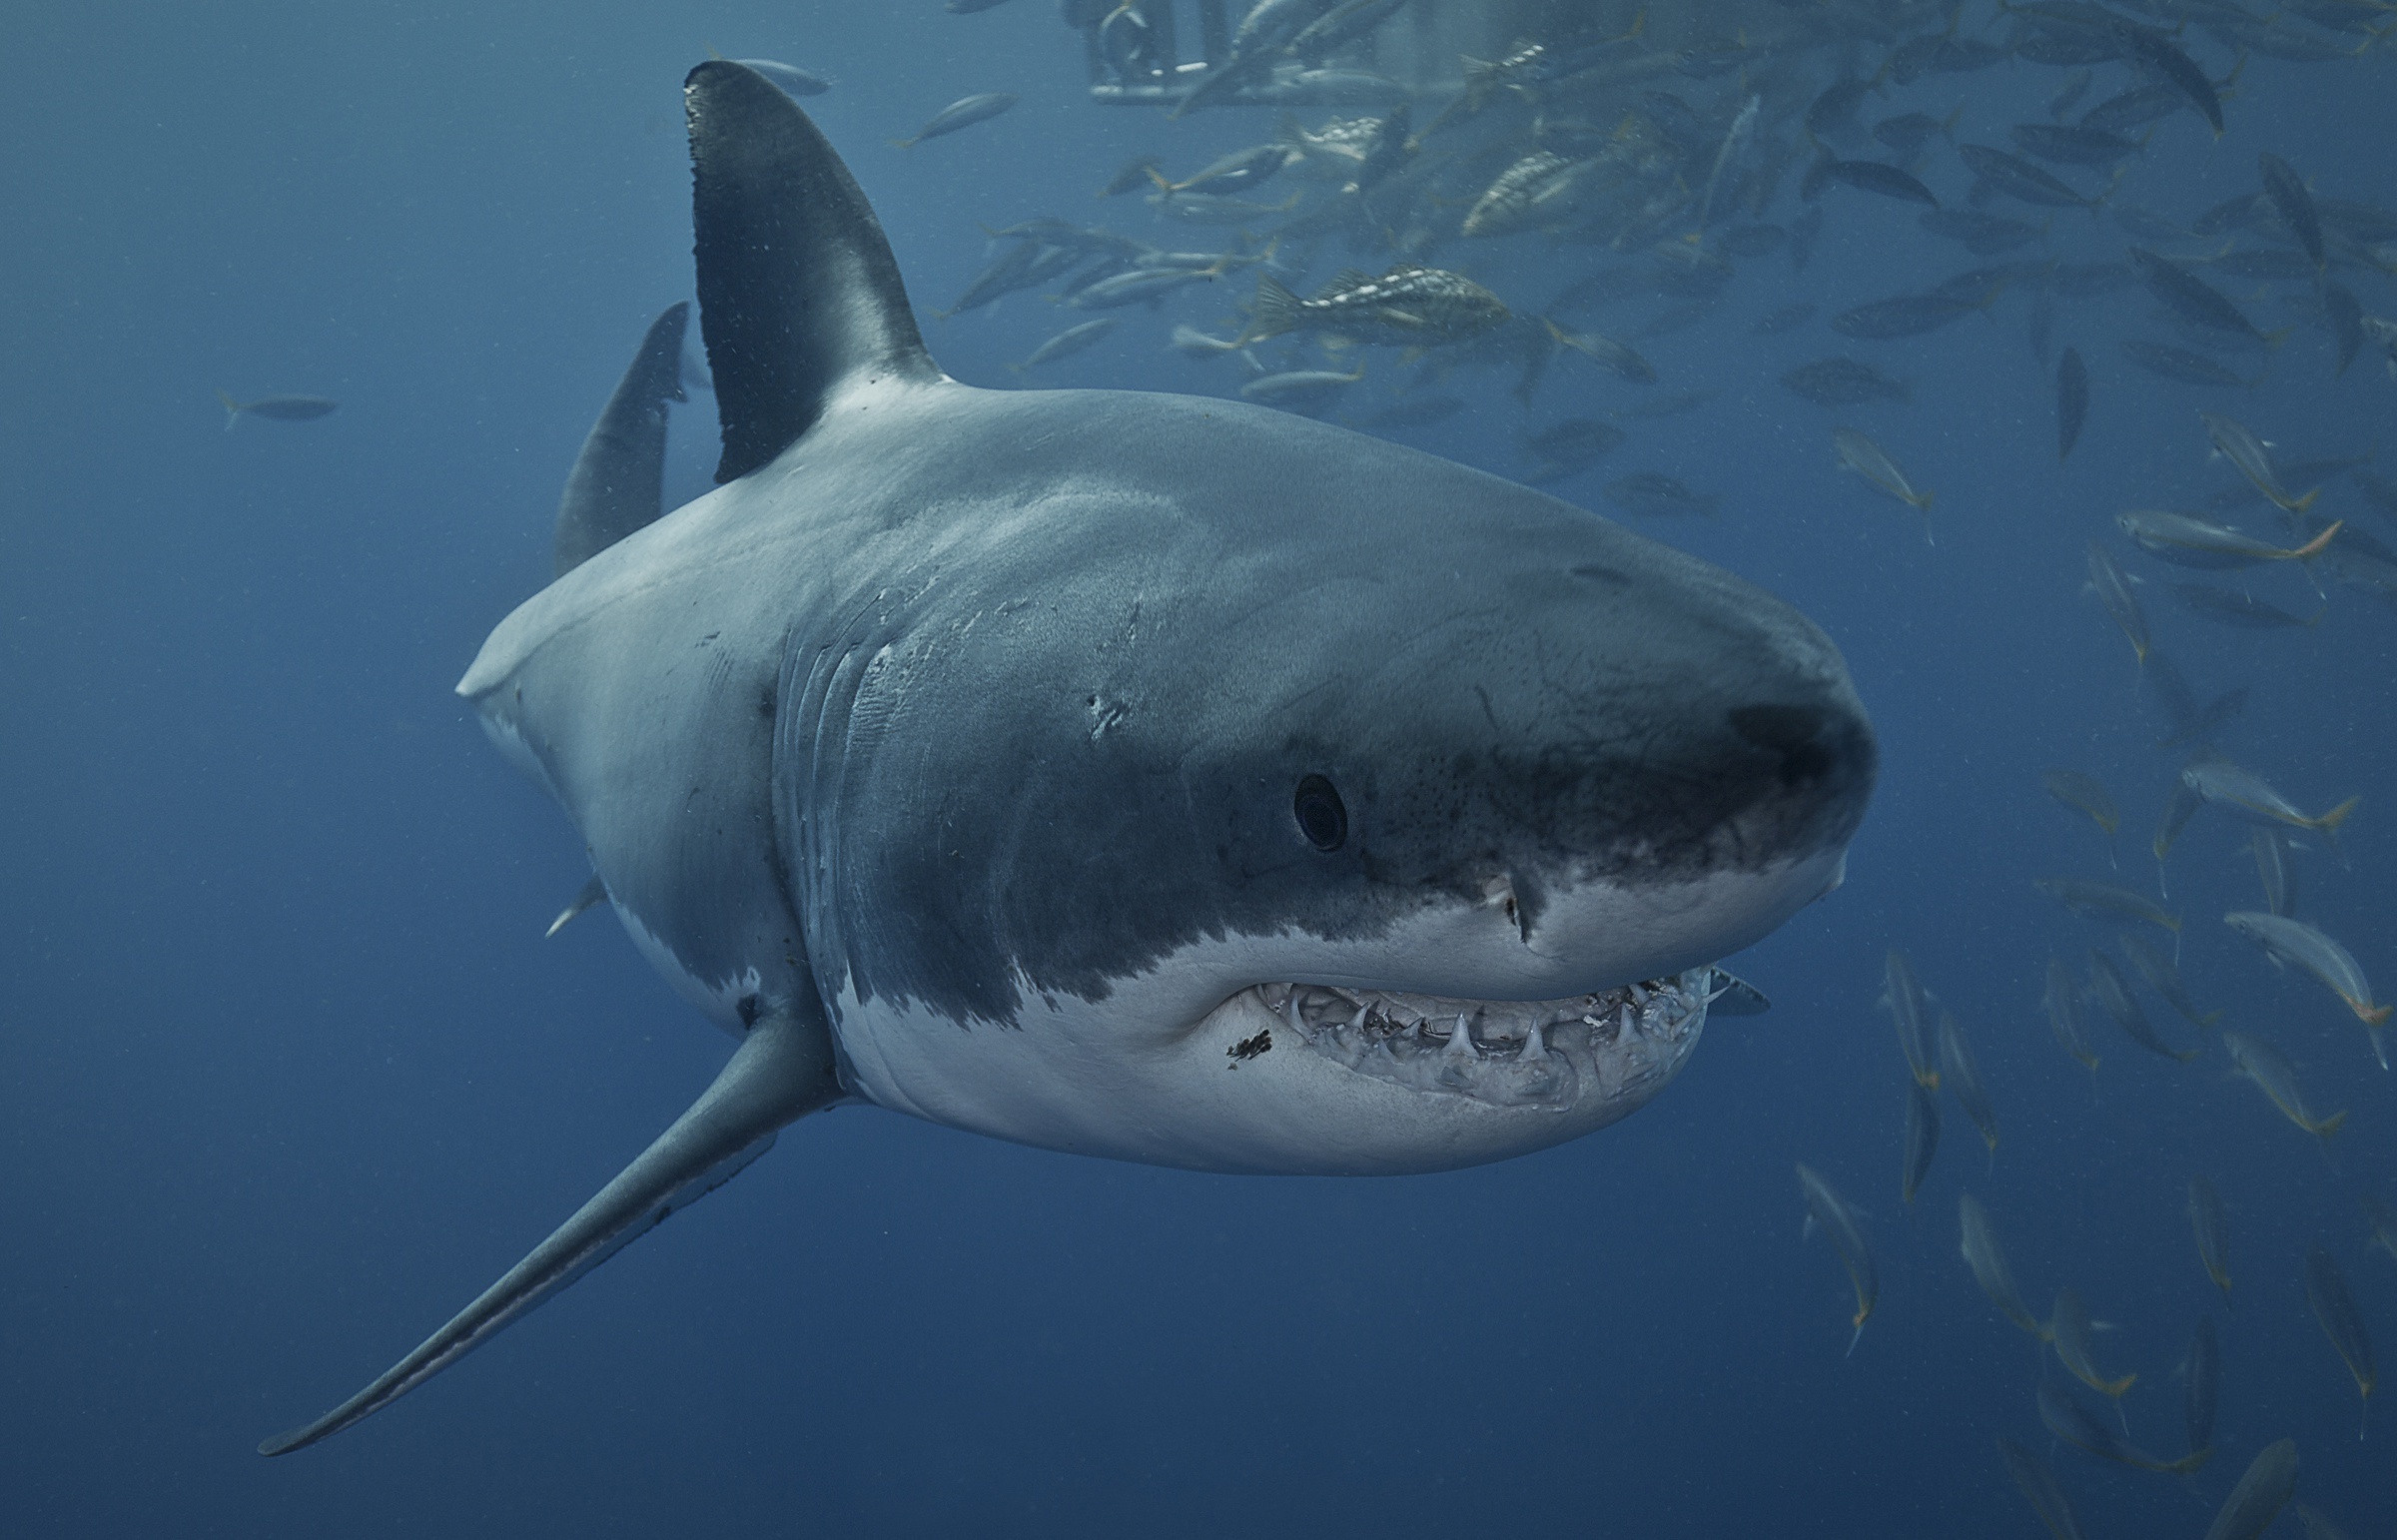 Great White Shark: The species that is responsible for more recorded human bite incidents than any other shark. 2400x1550 HD Wallpaper.